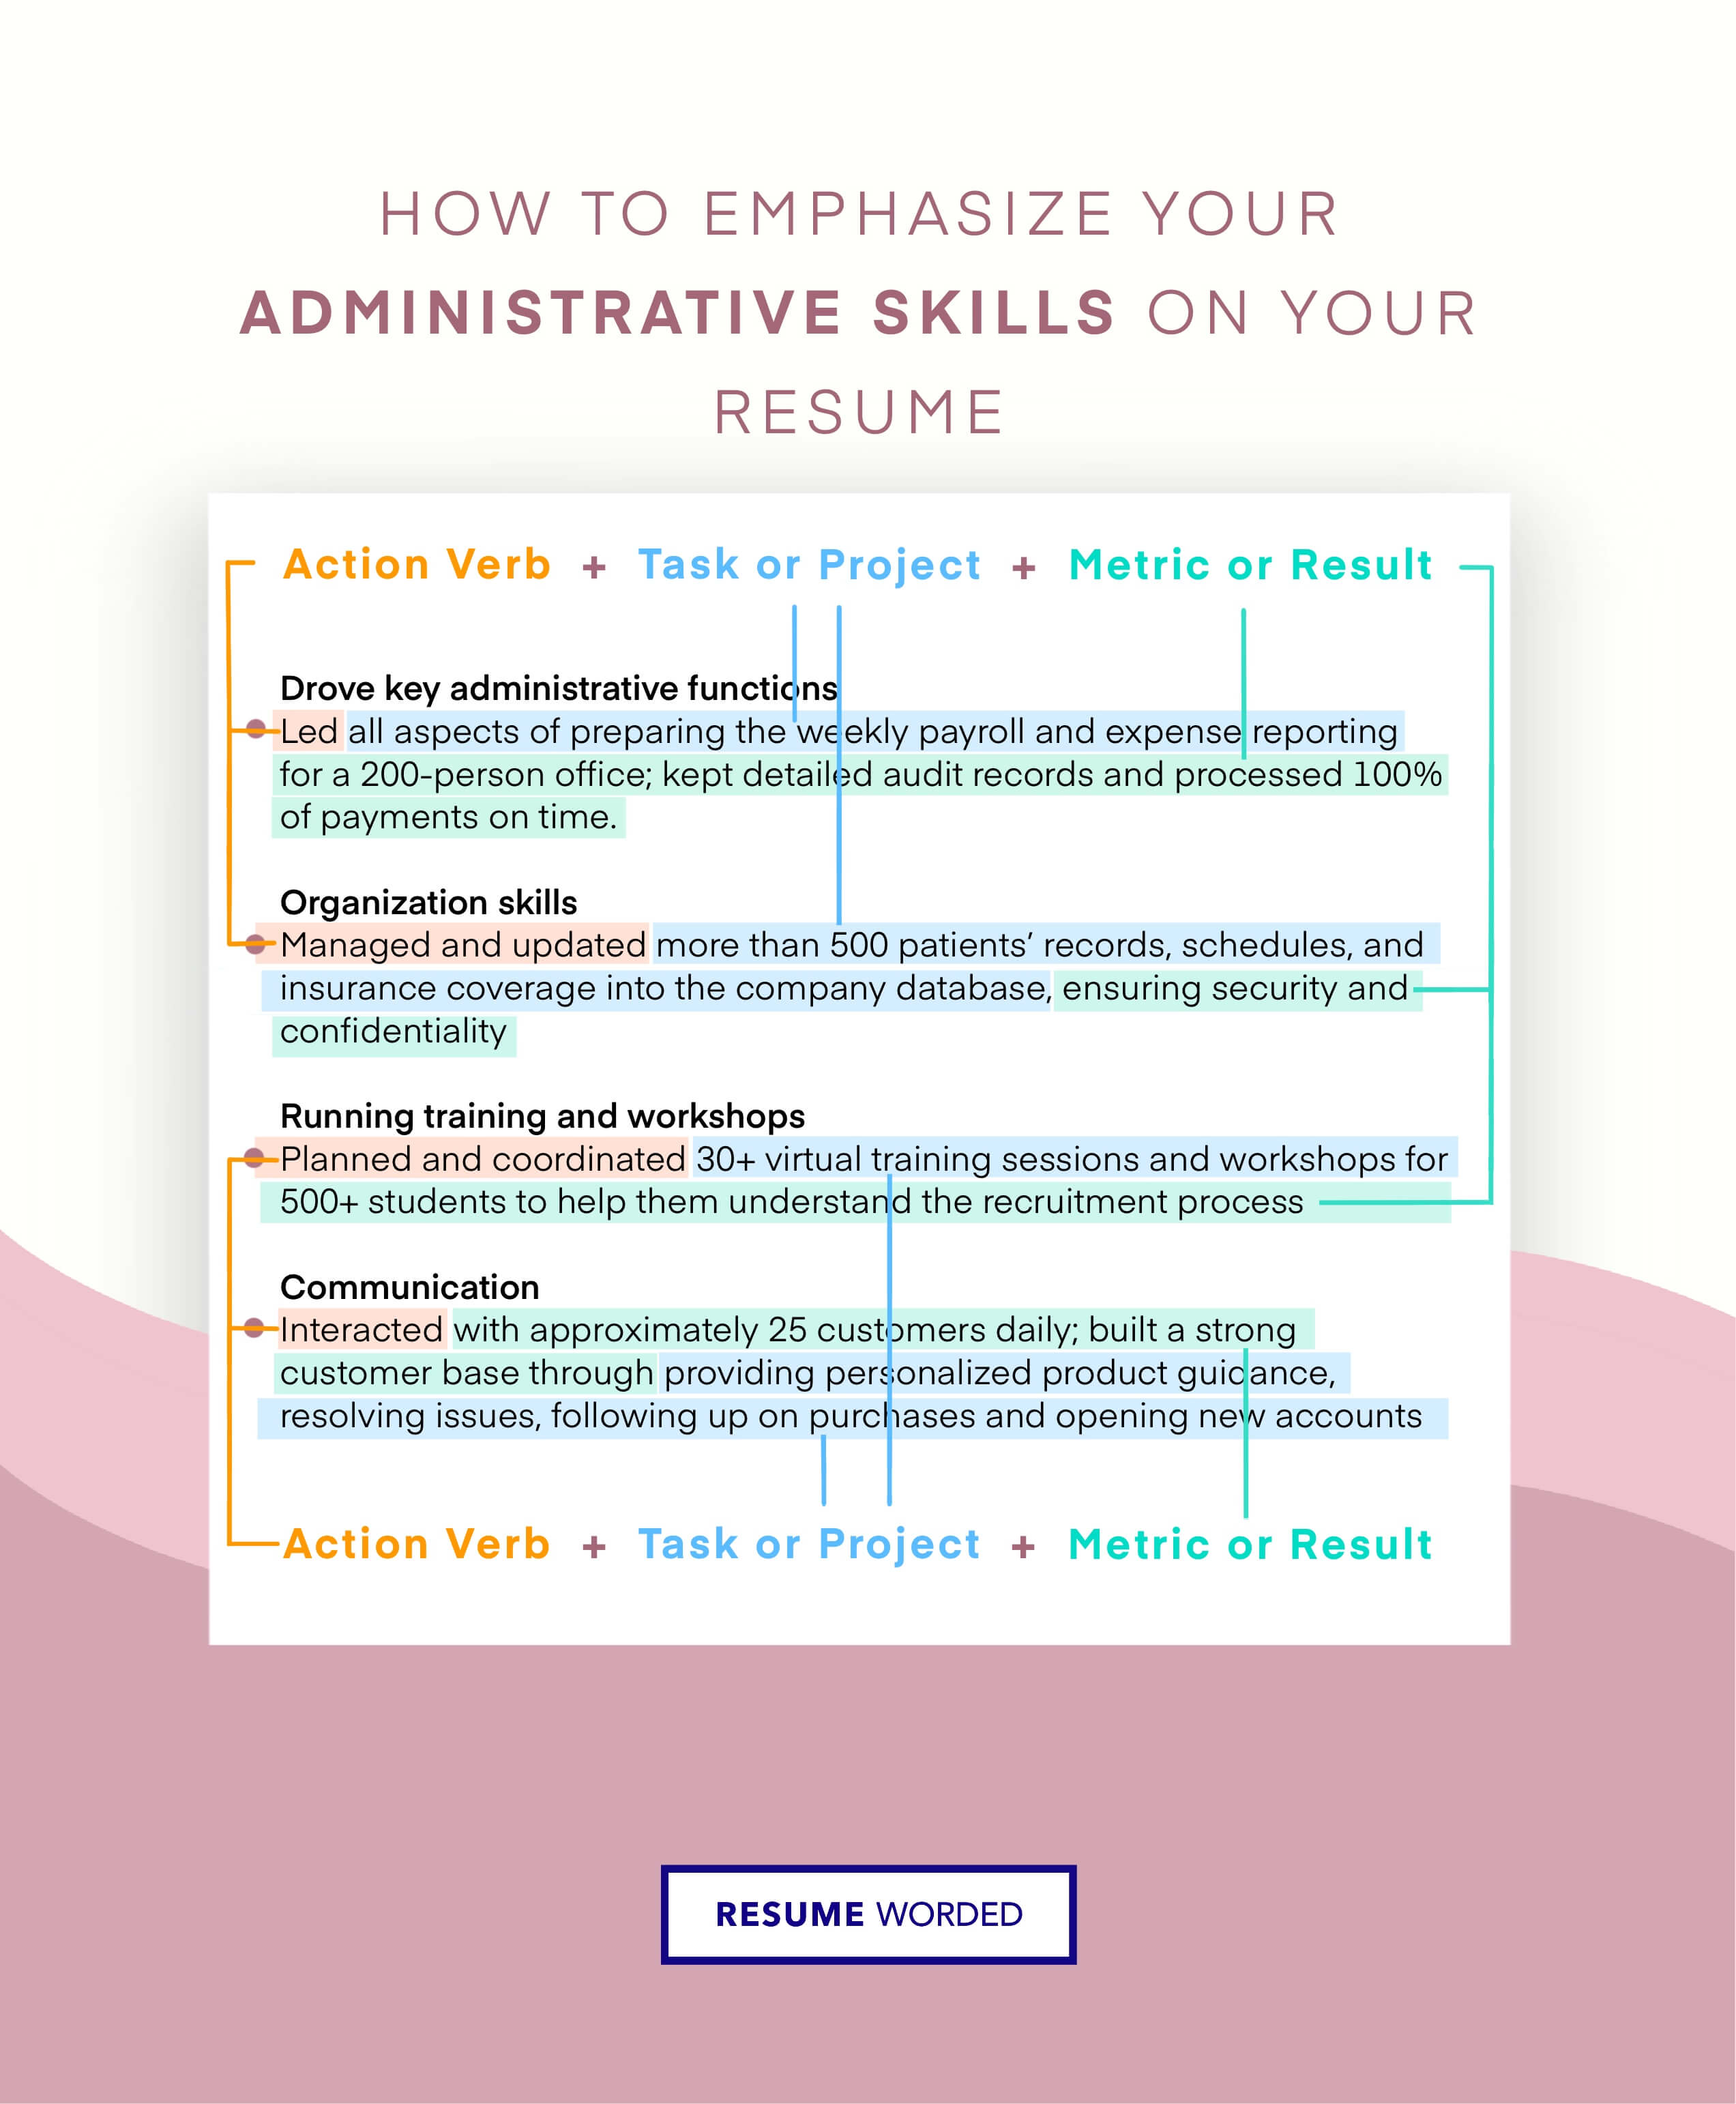 Show your administrative prowess - Entry-Level Executive Assistant CV